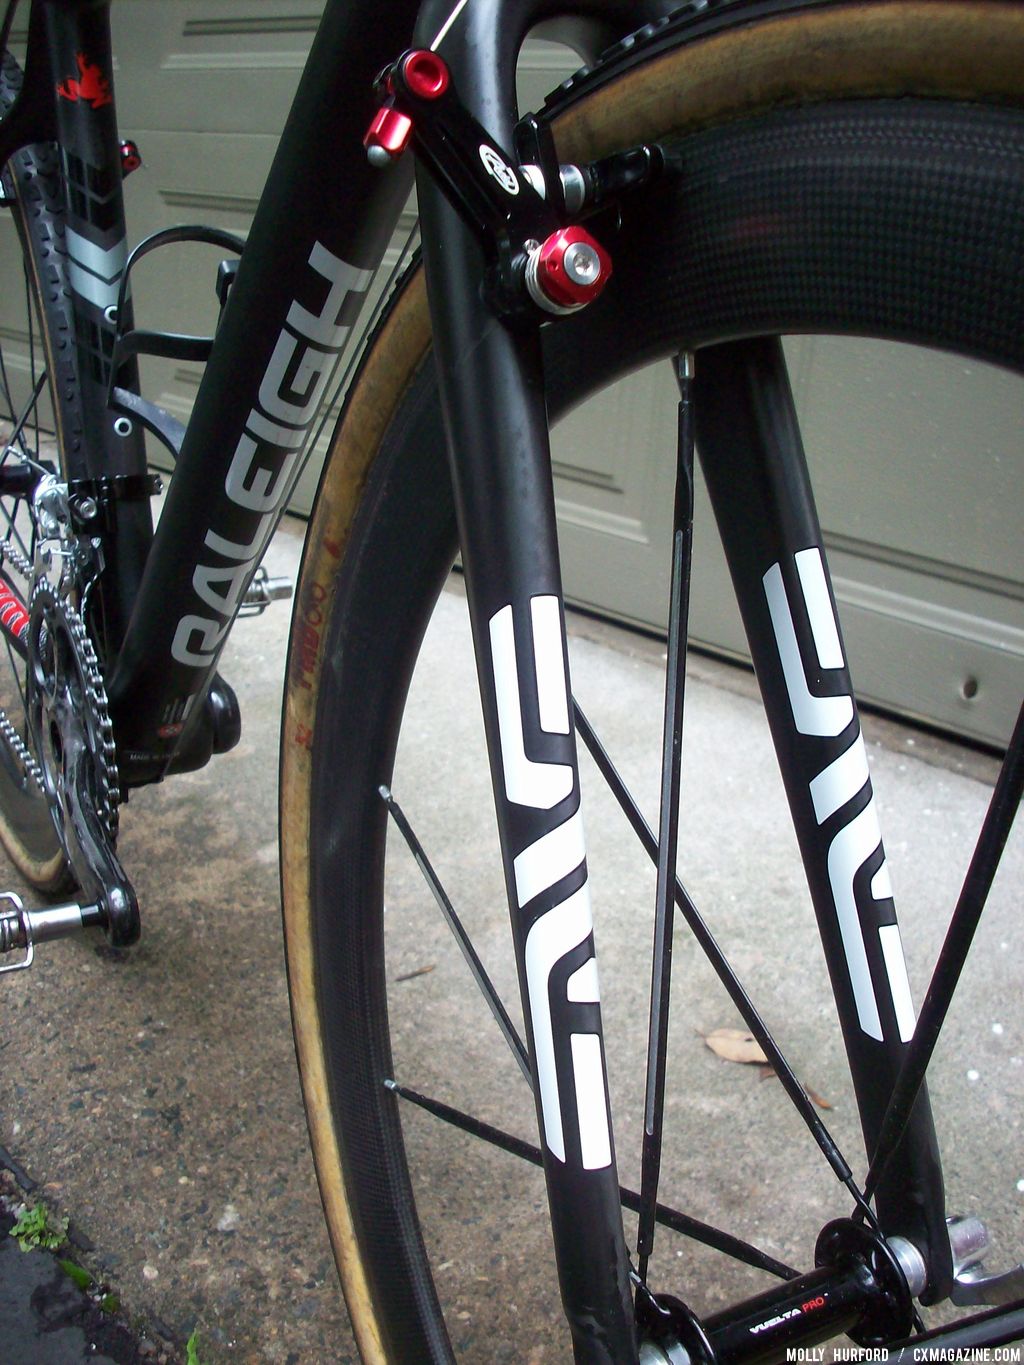 The Enve fork (note the logo design!) is standard with the Raleigh frame. © Molly Hurford 